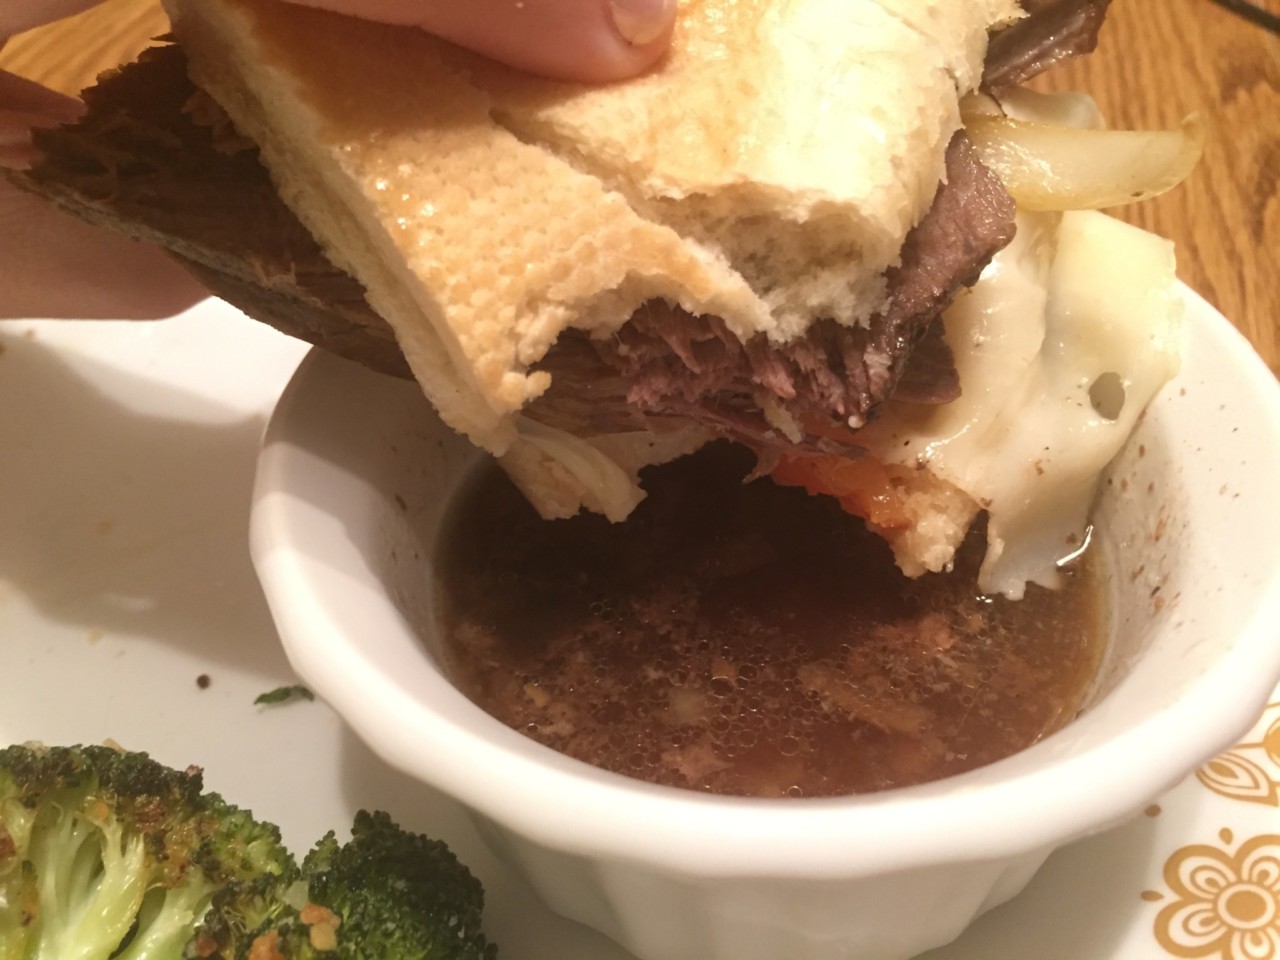 french dip sandwich @ bestwithchocolate.com